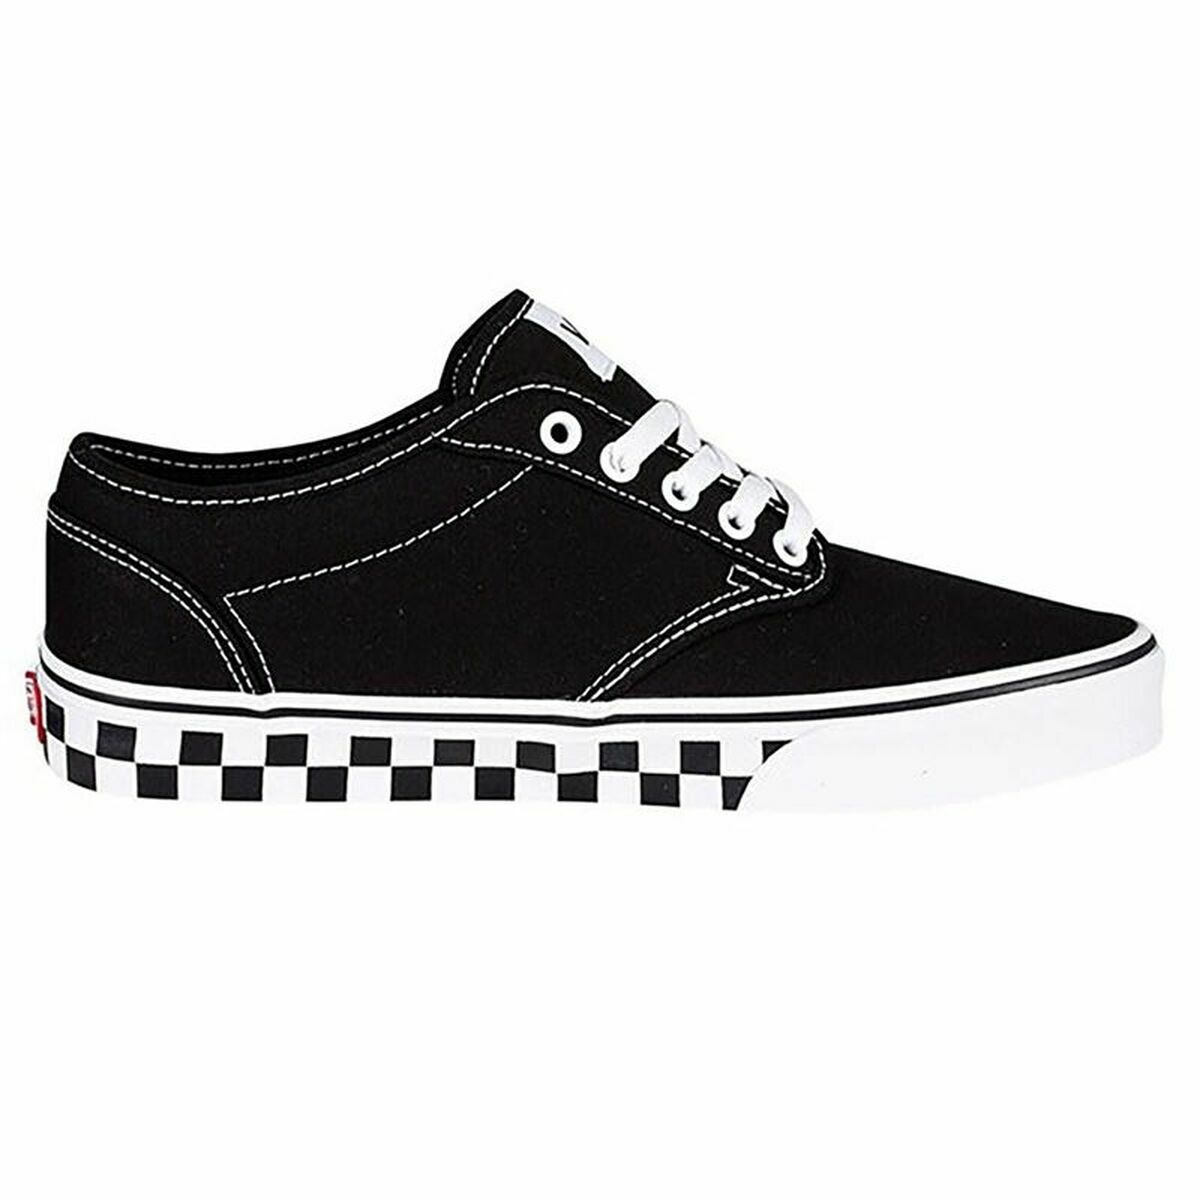 Chaussures casual homme Vans Atwood Noir